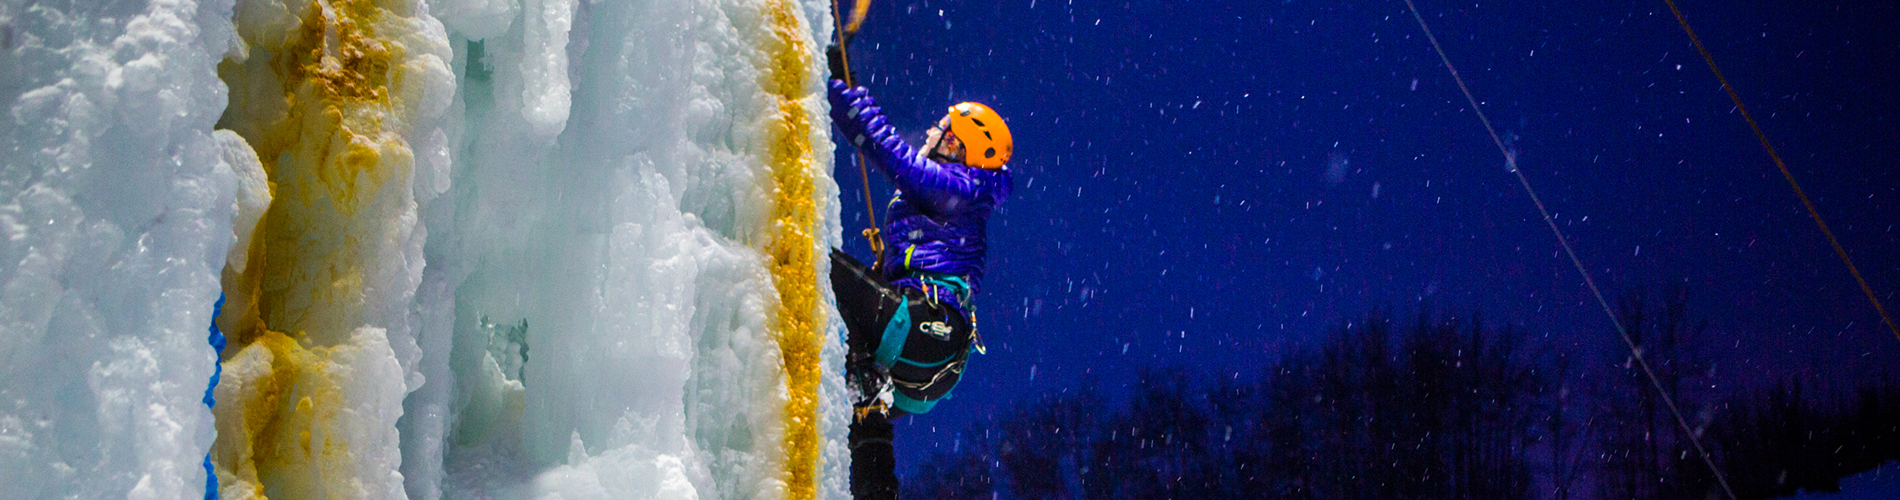 Climbing the outdoor ice wall